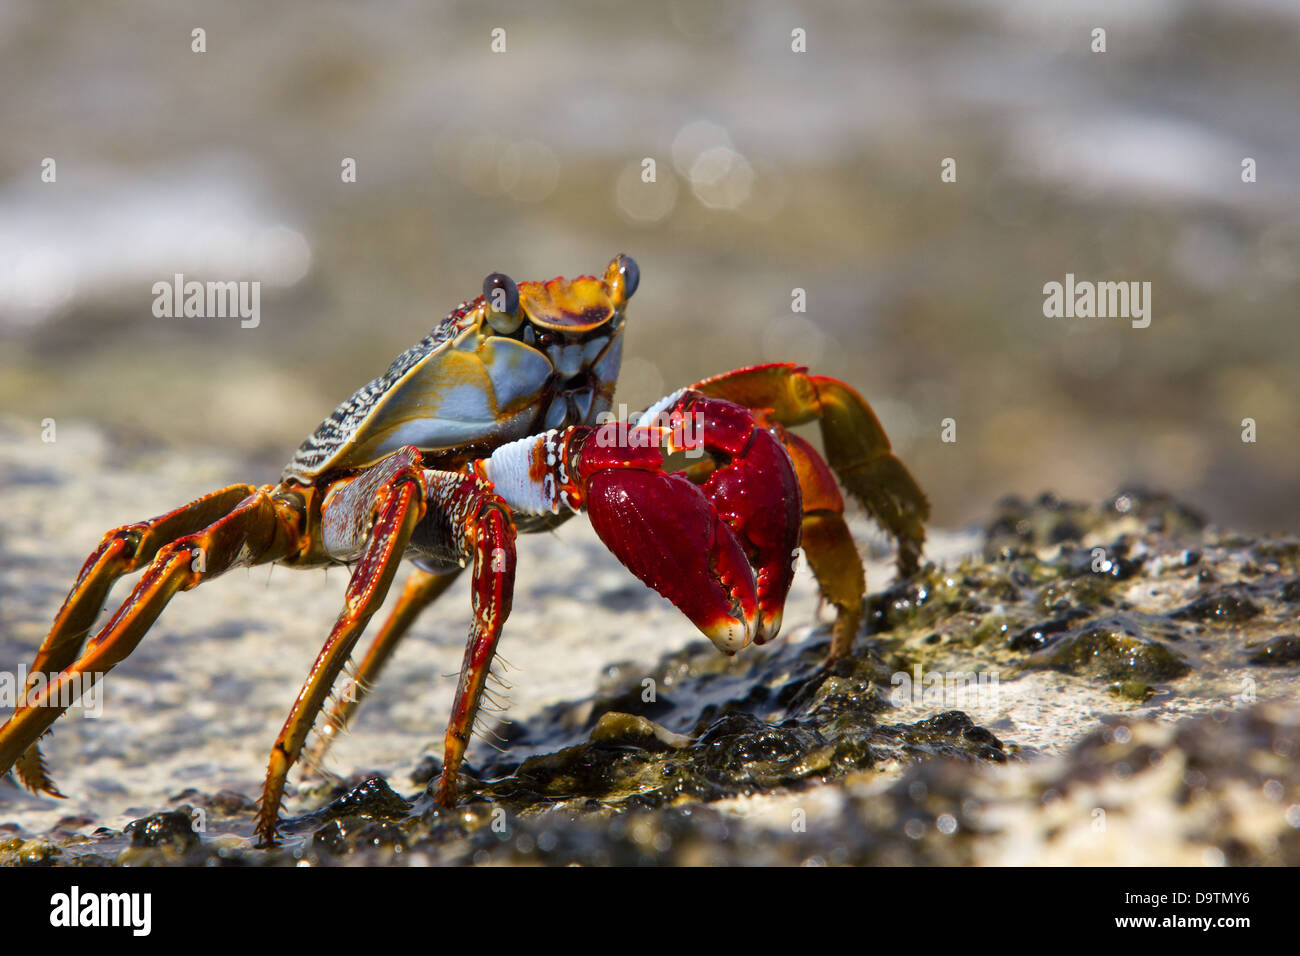 Close up detail of a Sally Lightfoot crab With Bright Red Claws on Caribbean Rocks. Stock Photo